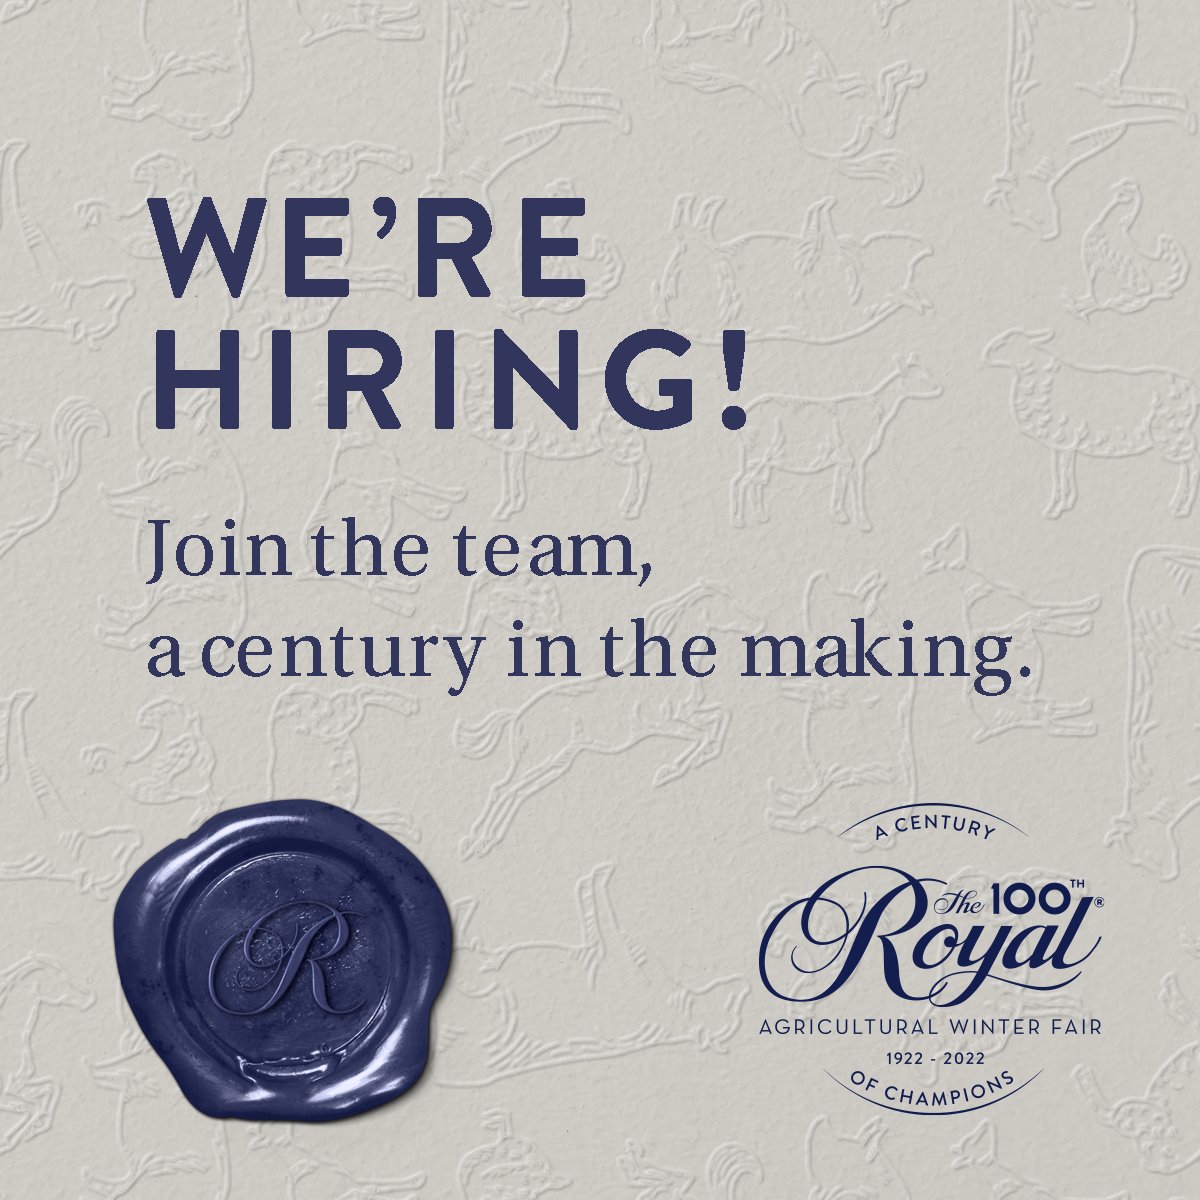 We're hiring! Join the team, a century in the making. We have the current positions available: Manager Agriculture ca.indeed.com/viewjob?t=mana… Manager Education and Features ca.indeed.com/viewjob?t=mana… #RoadToTheRoyal #RAWF100 #RoyalChampions